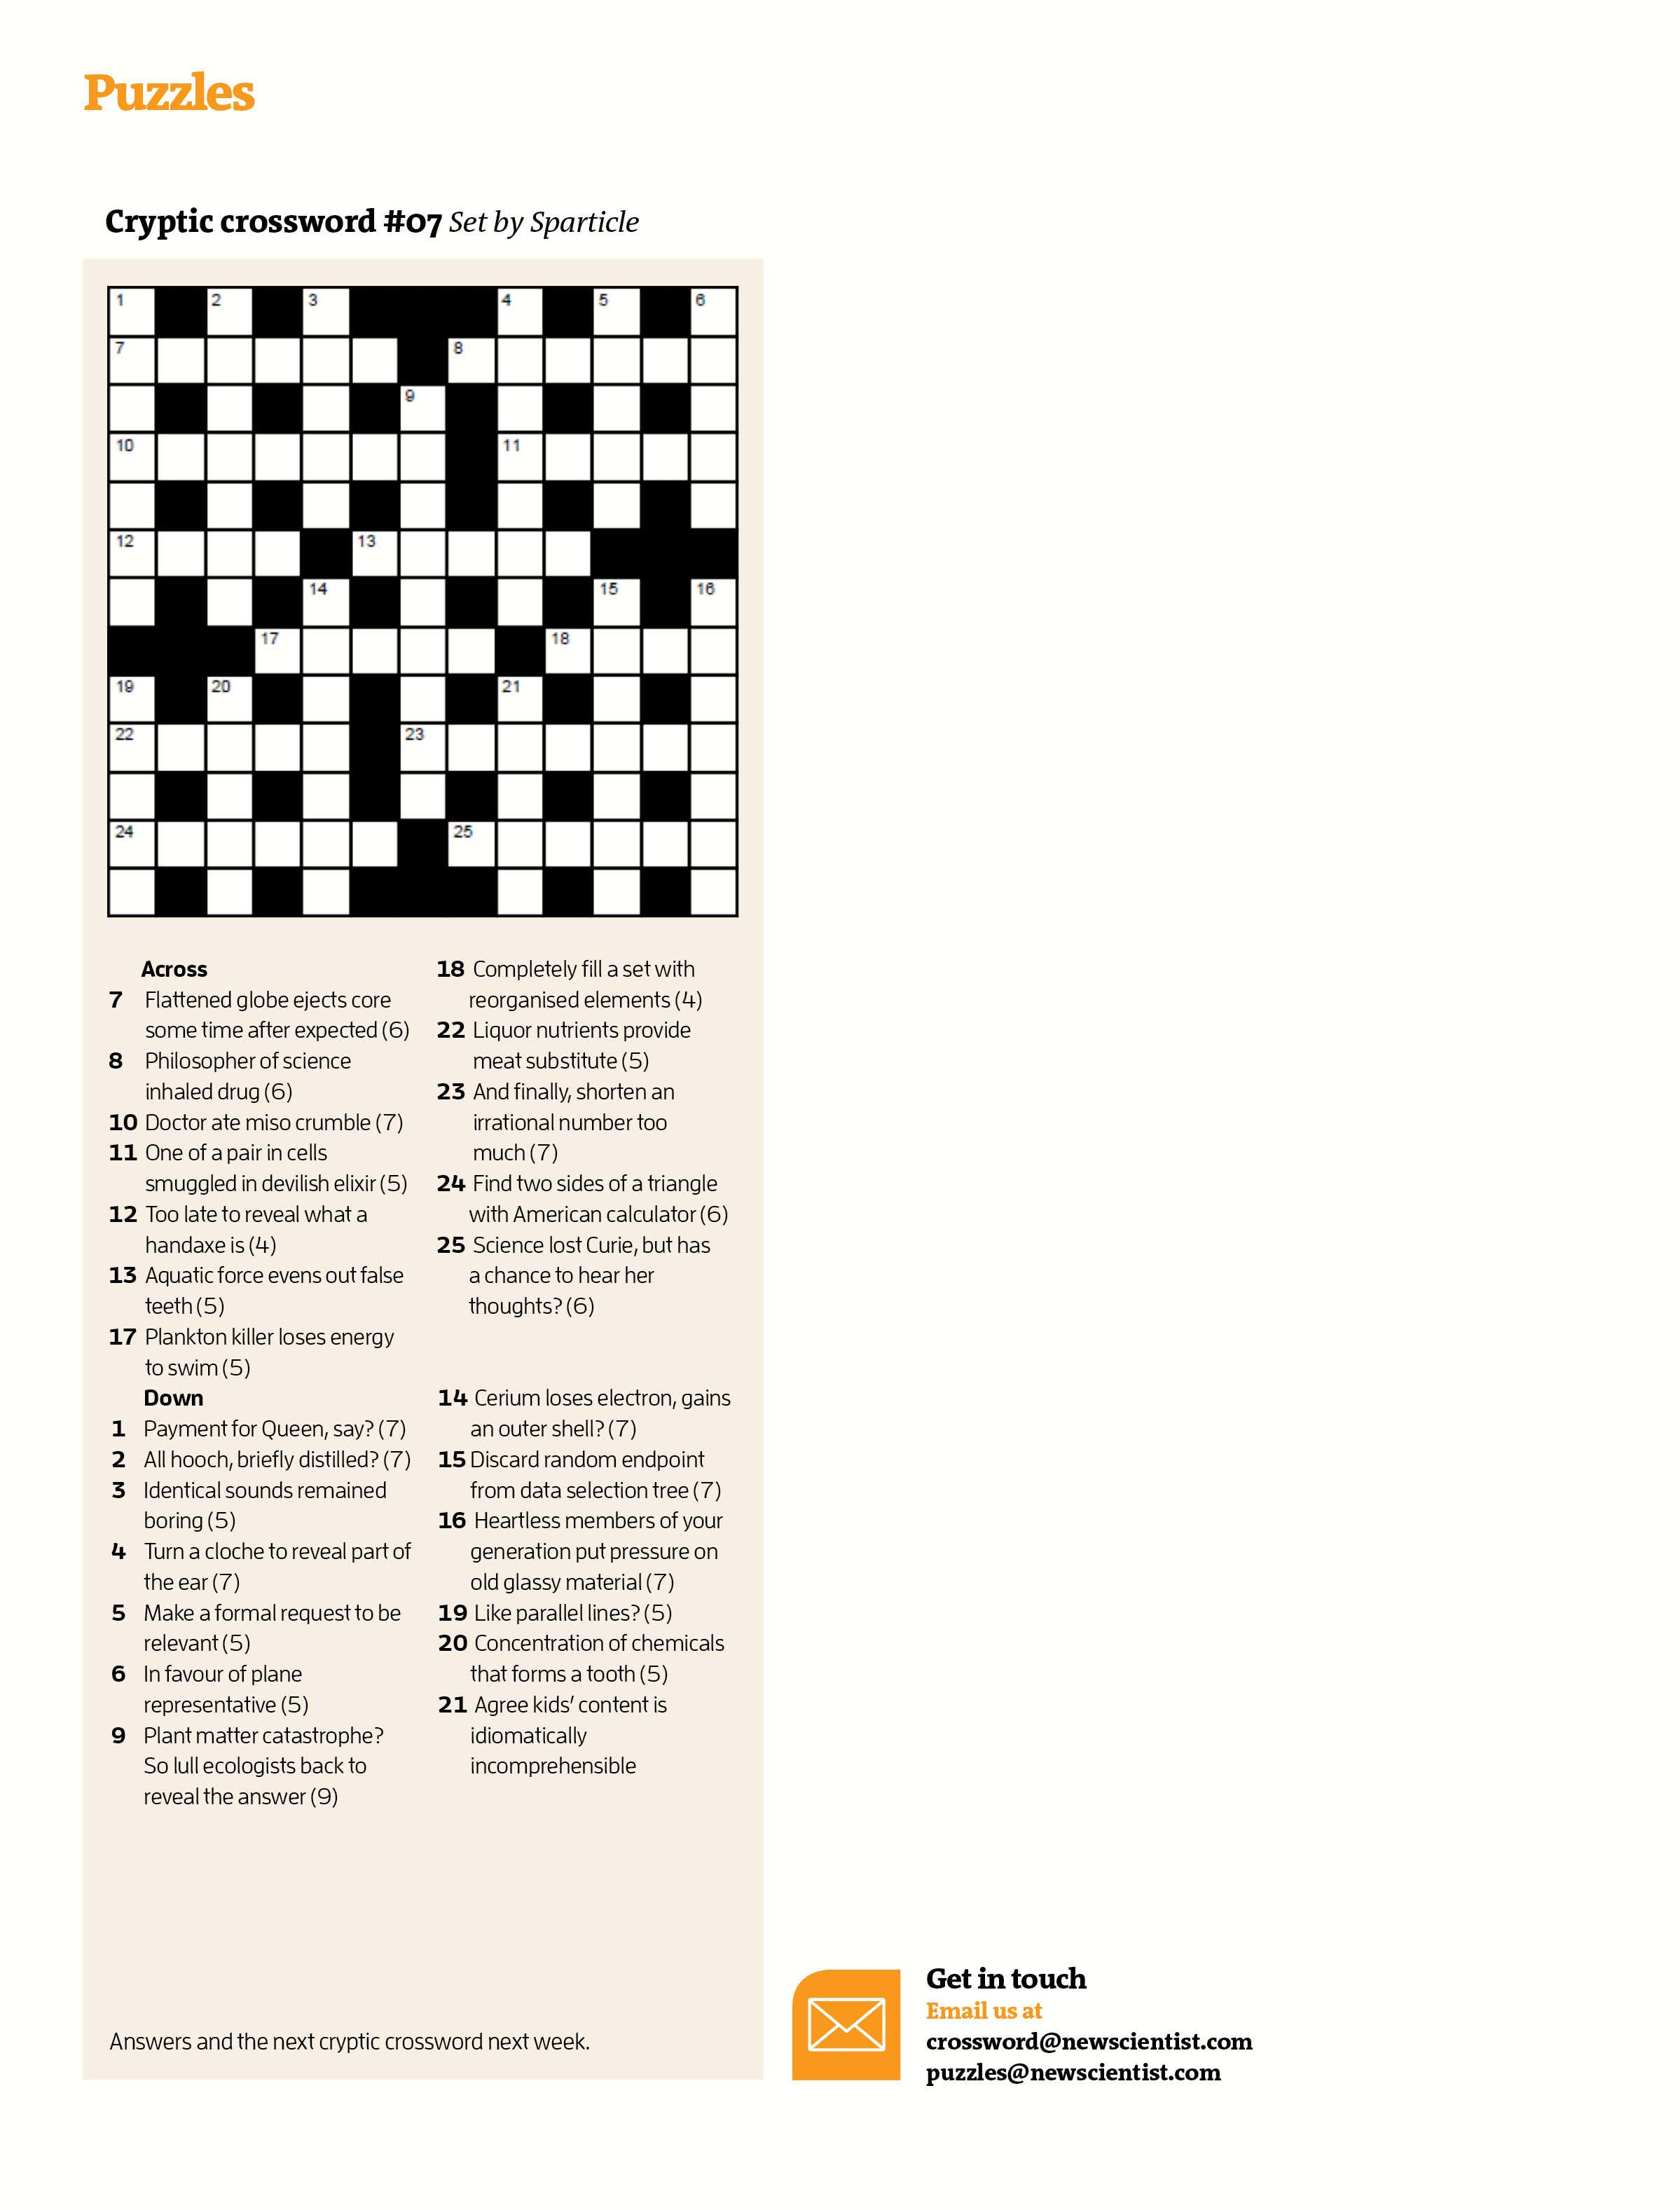 Cryptic Crossword #07 | New Scientist - Printable Crossword Puzzles Globe And Mail